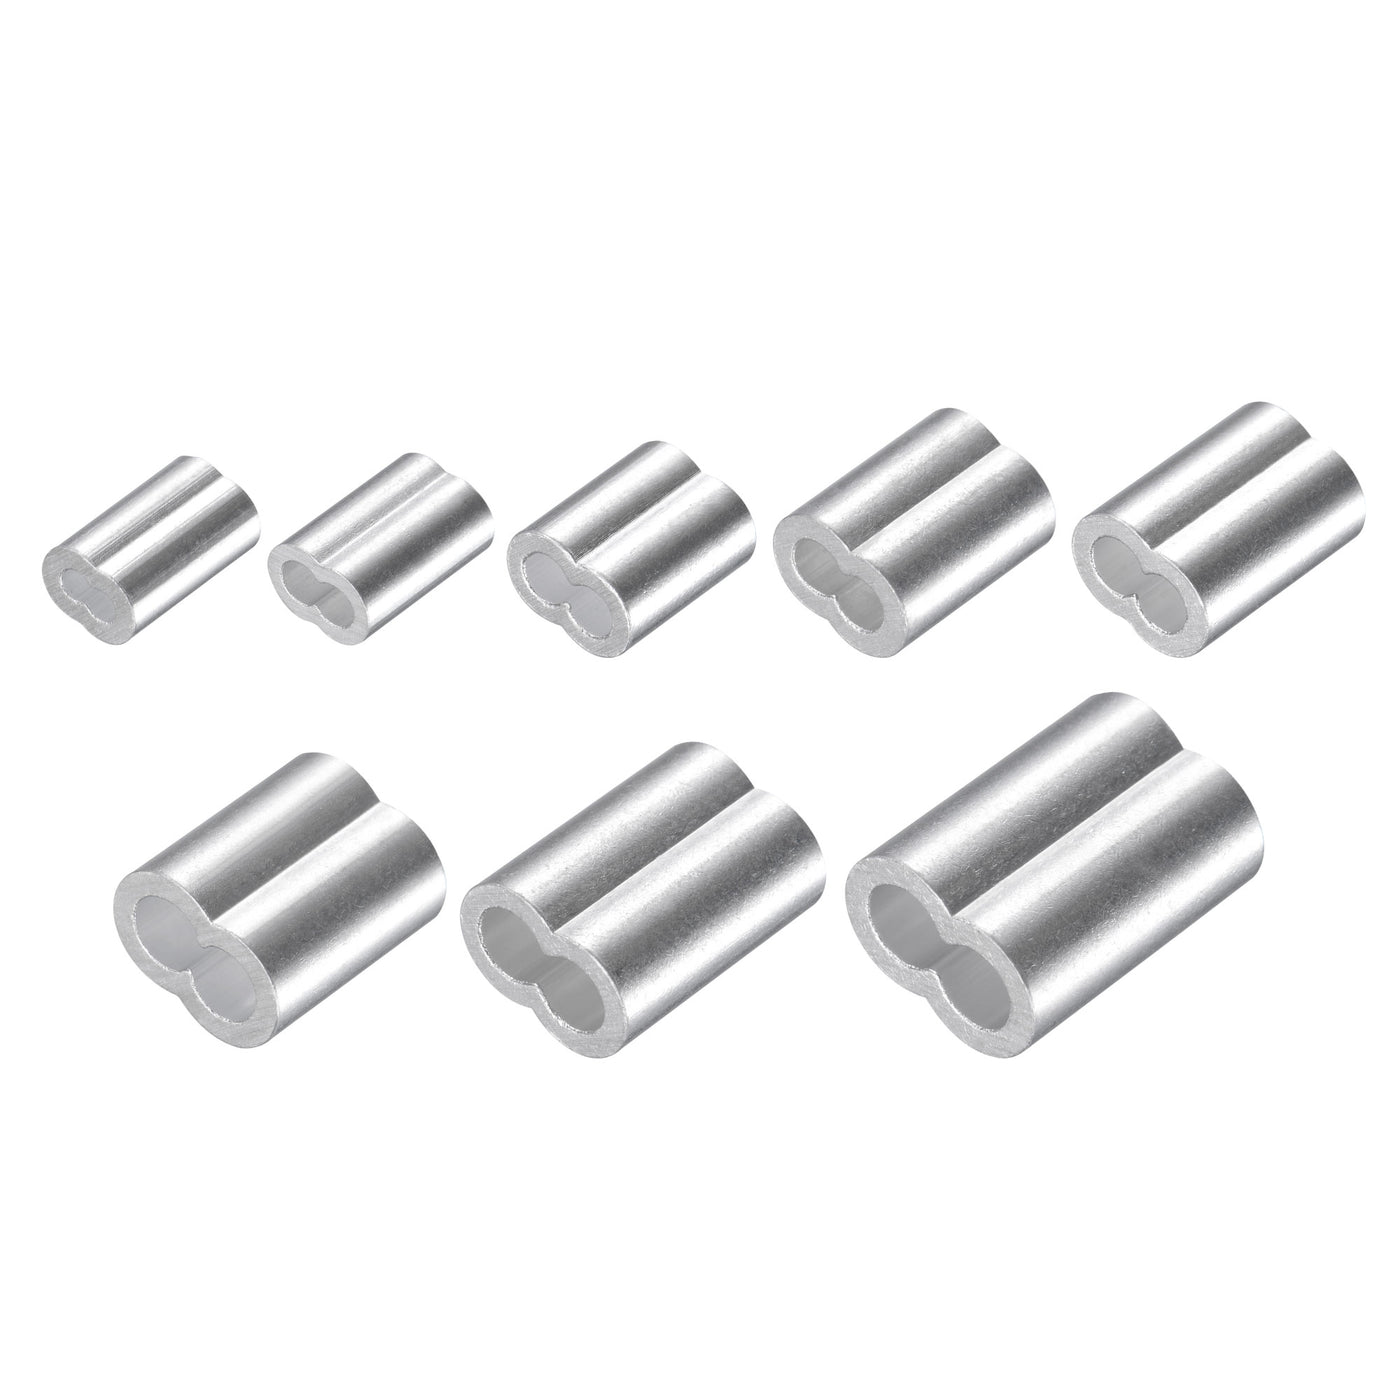 uxcell Uxcell Wire Rope Aluminum Crimping Loop Sleeve Assortment Kit for 1.2/1.5/2/2.5/3/4/5/6mm Dia., Cable Crimp Double Hole Ferrule Clip Fittings 265in1 Set